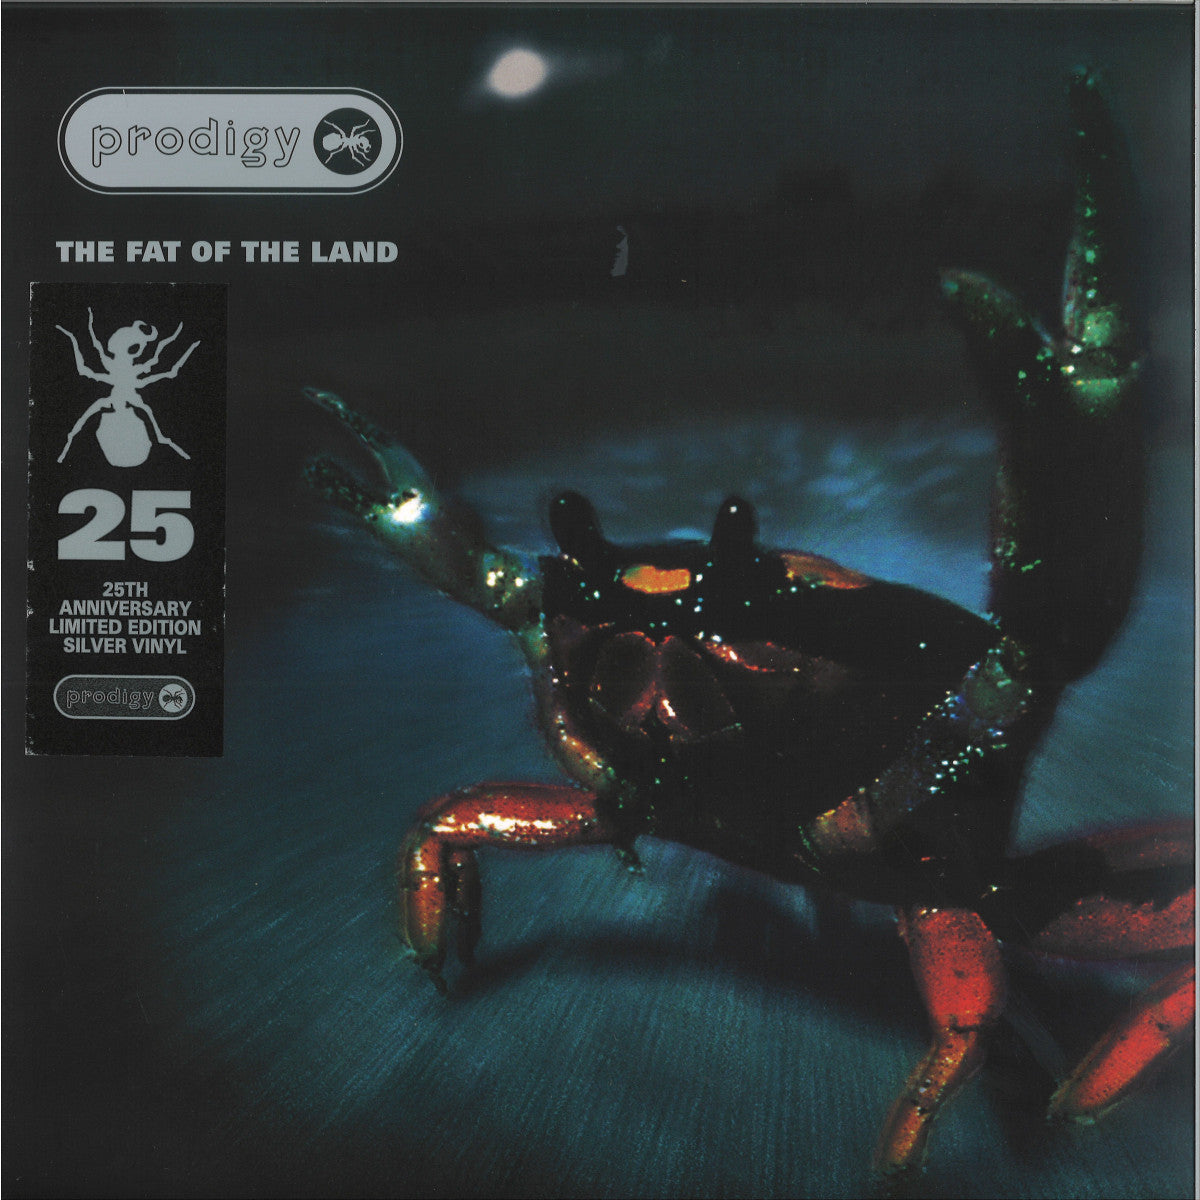 Prodigy - The Fat of the Land (25th Anniversary Limited Edition)